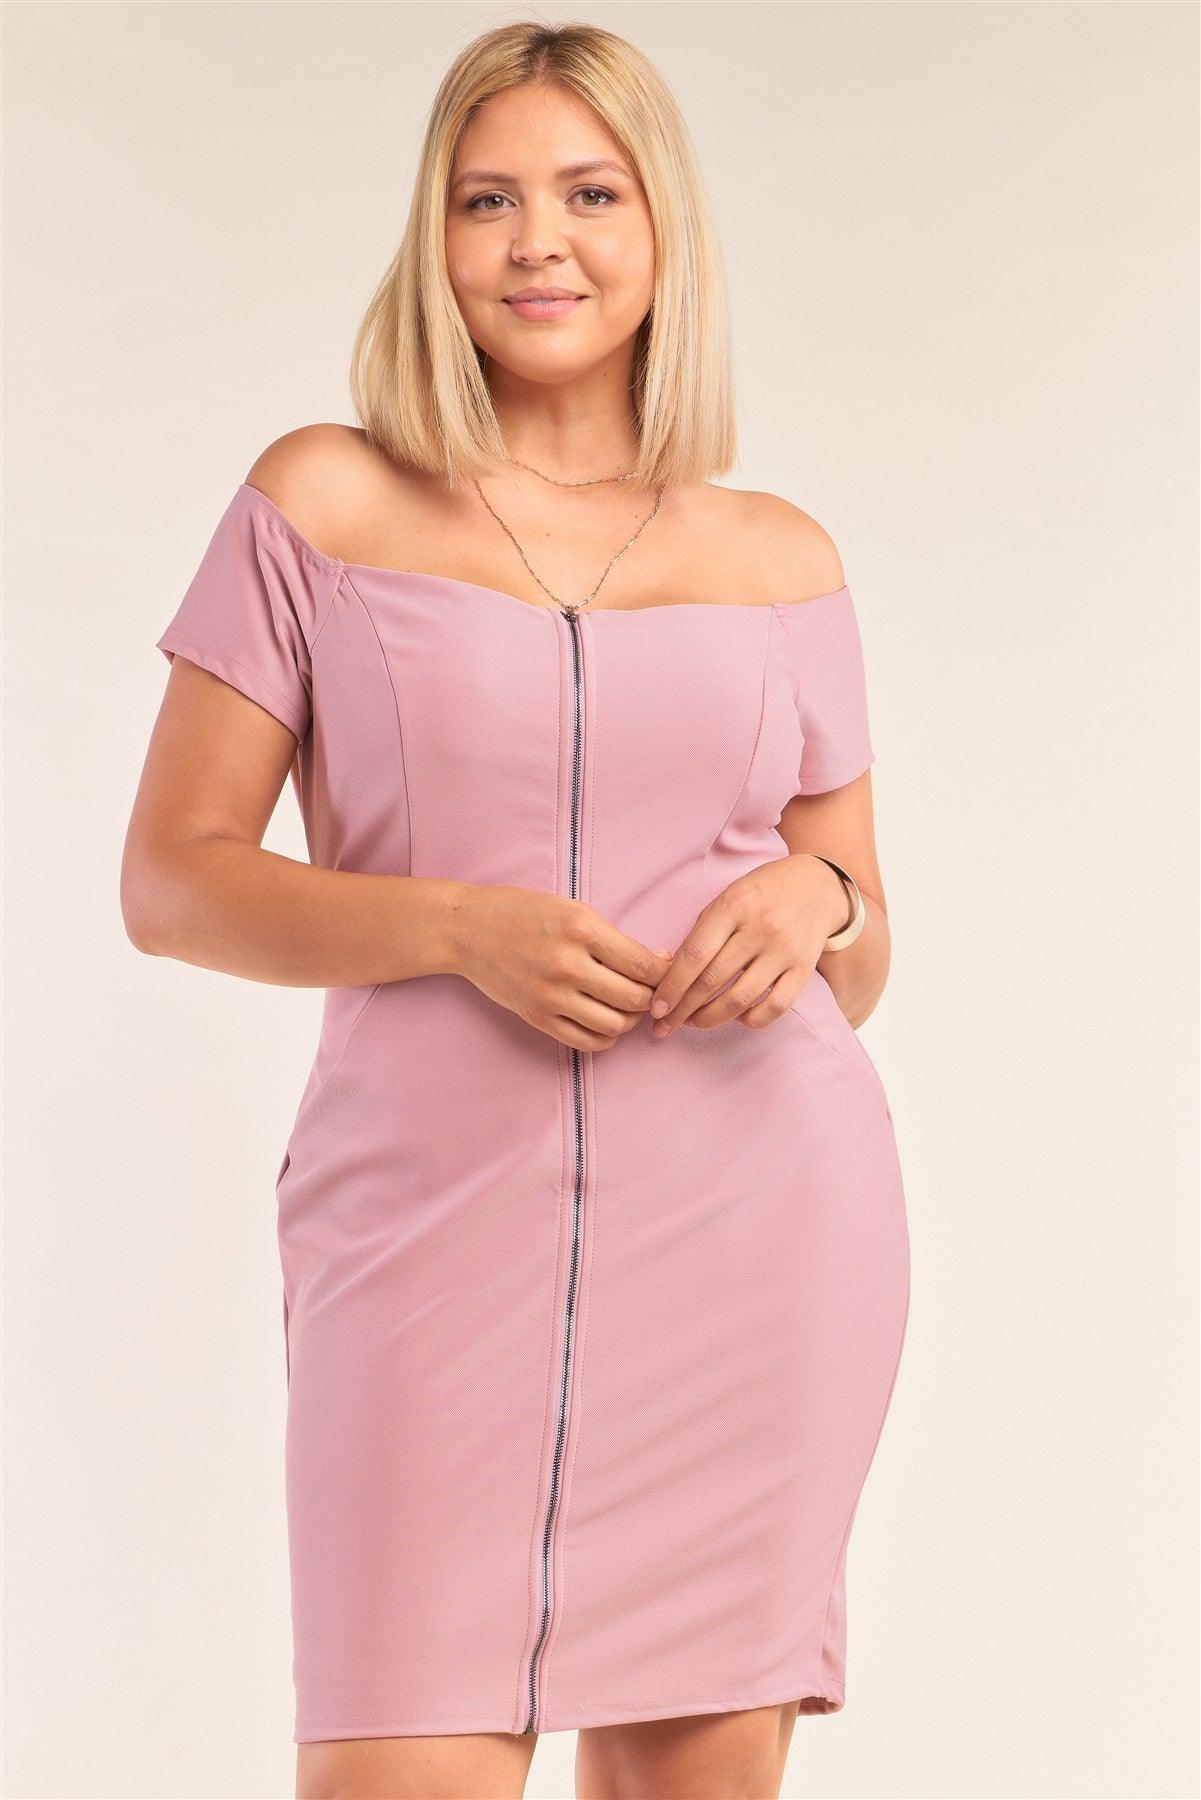 Junior Plus Size Blush Pink Fitted Off-The-Shoulder Front Zipper Bodycon Mini Dress /2-2-2